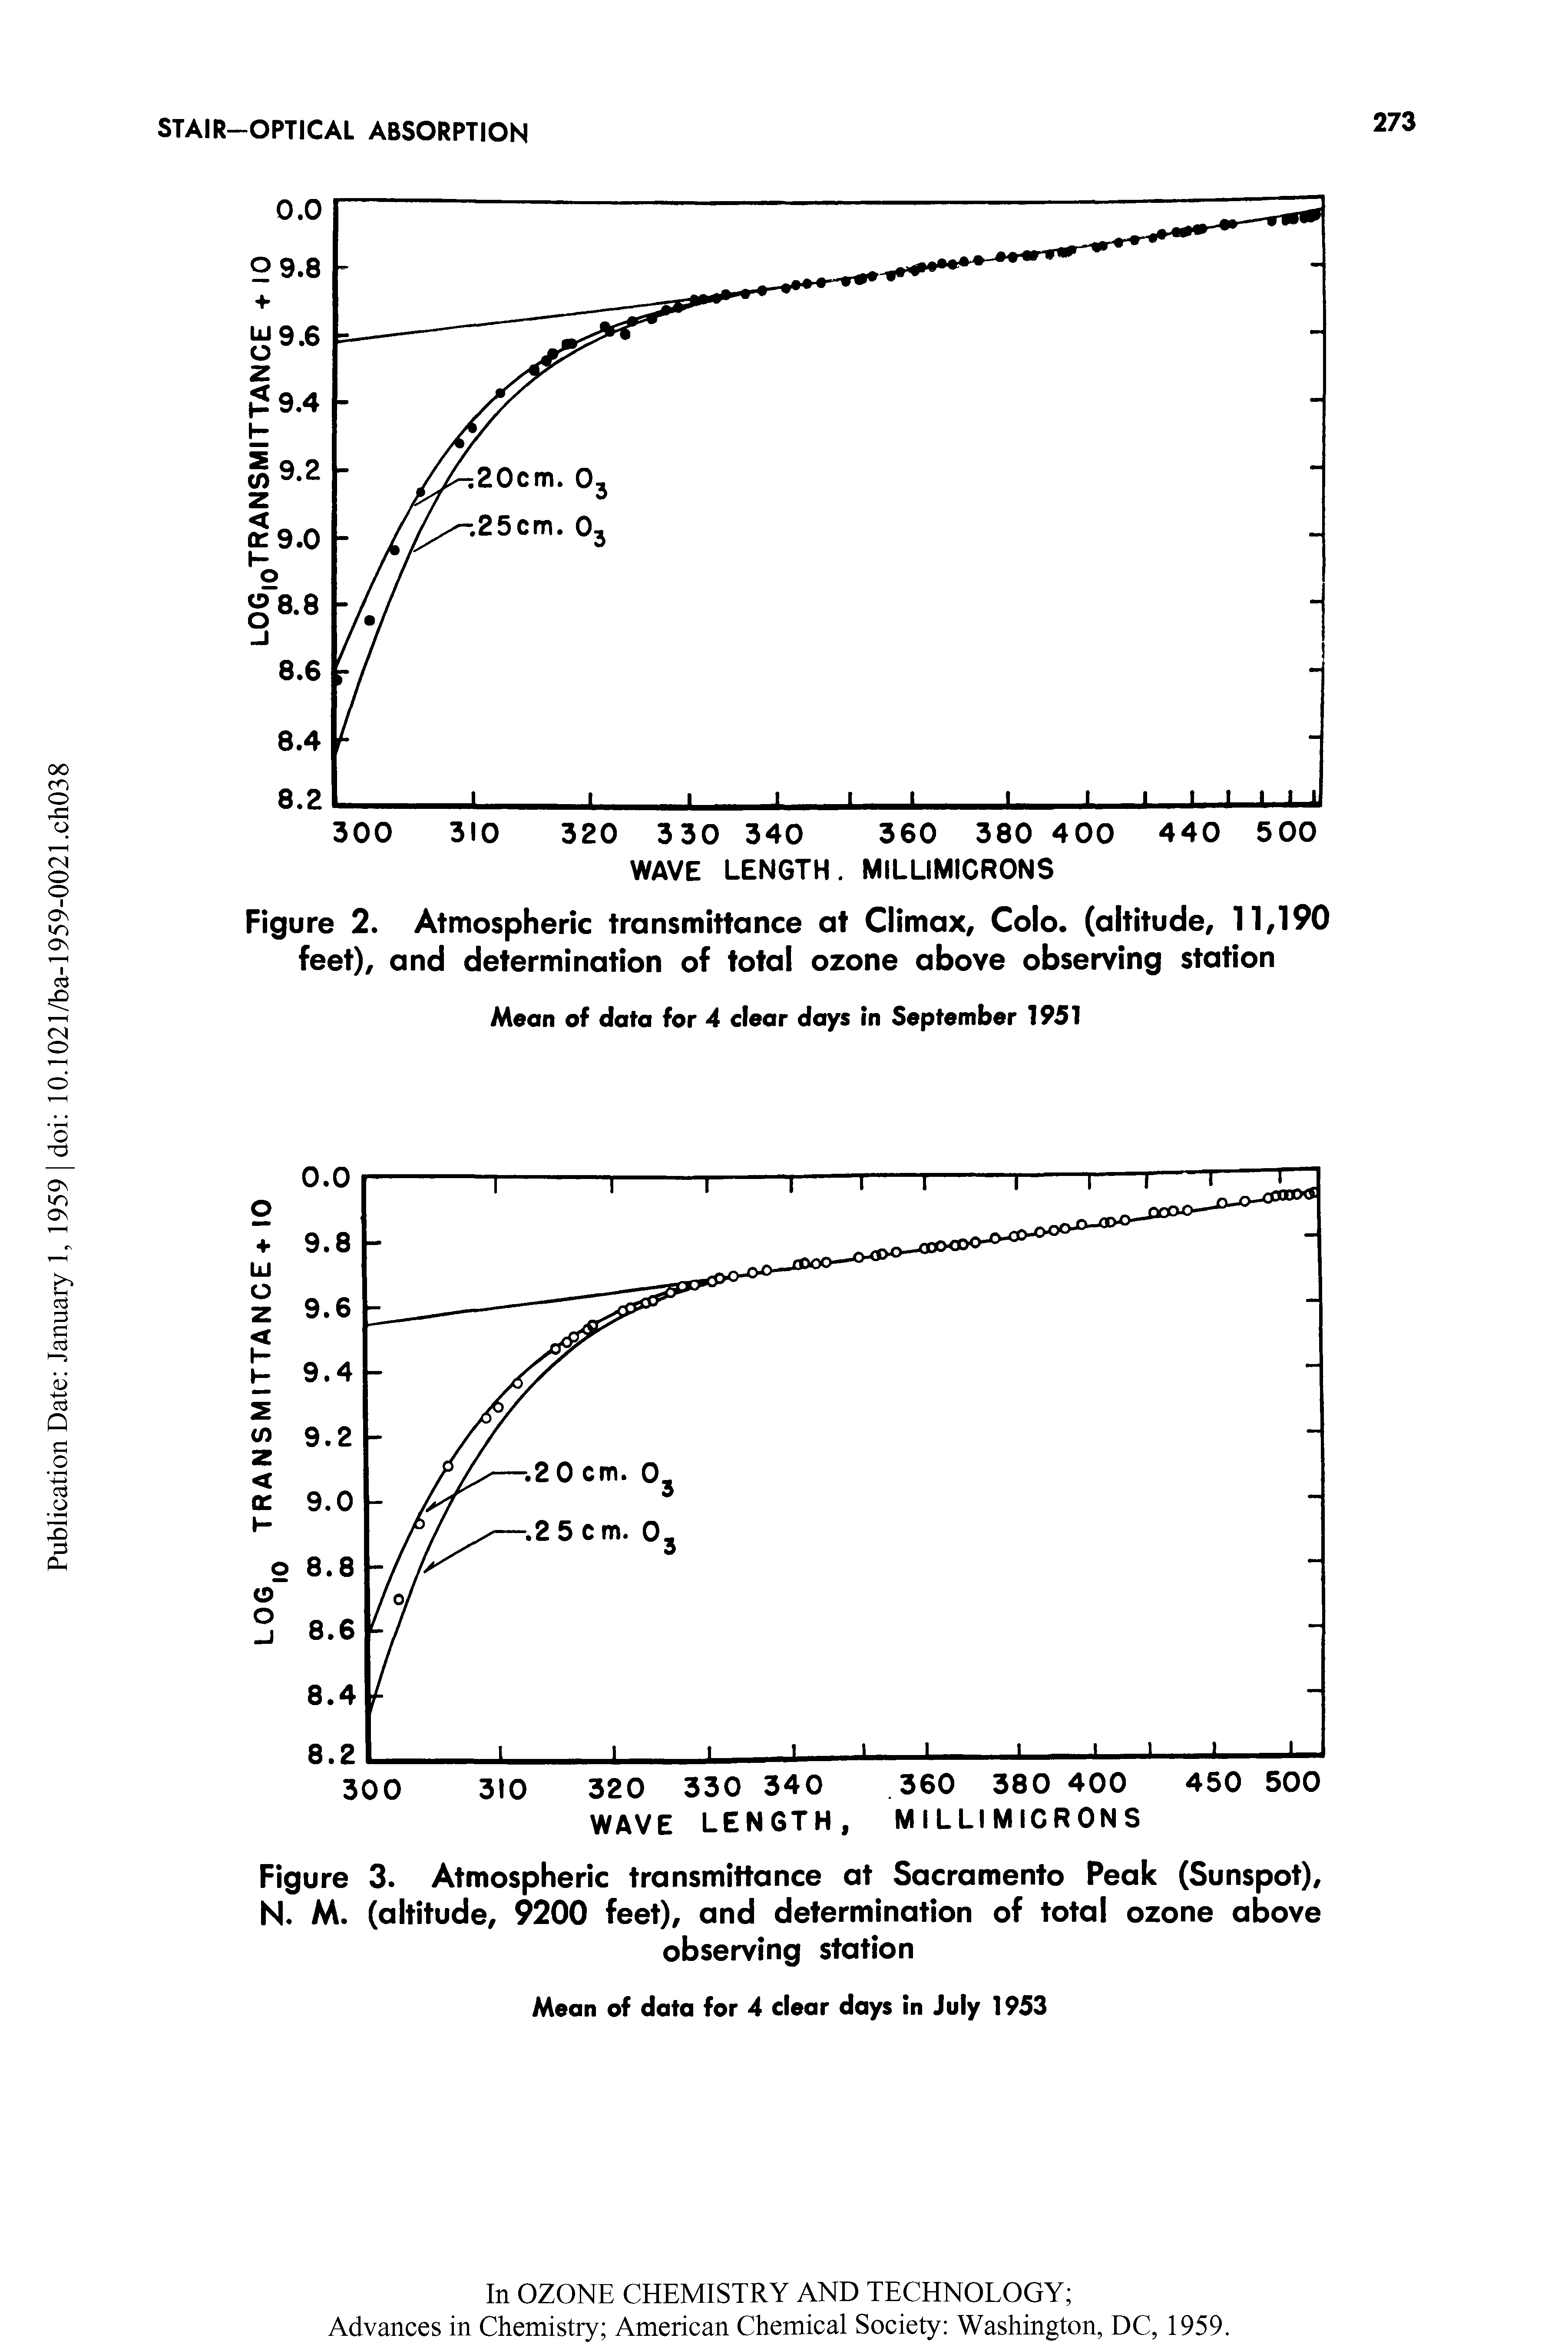 Figure 2. Atmospheric transmittance at Climax, Colo, (altitude, 11,190 feet), and determination of total ozone above observing station...